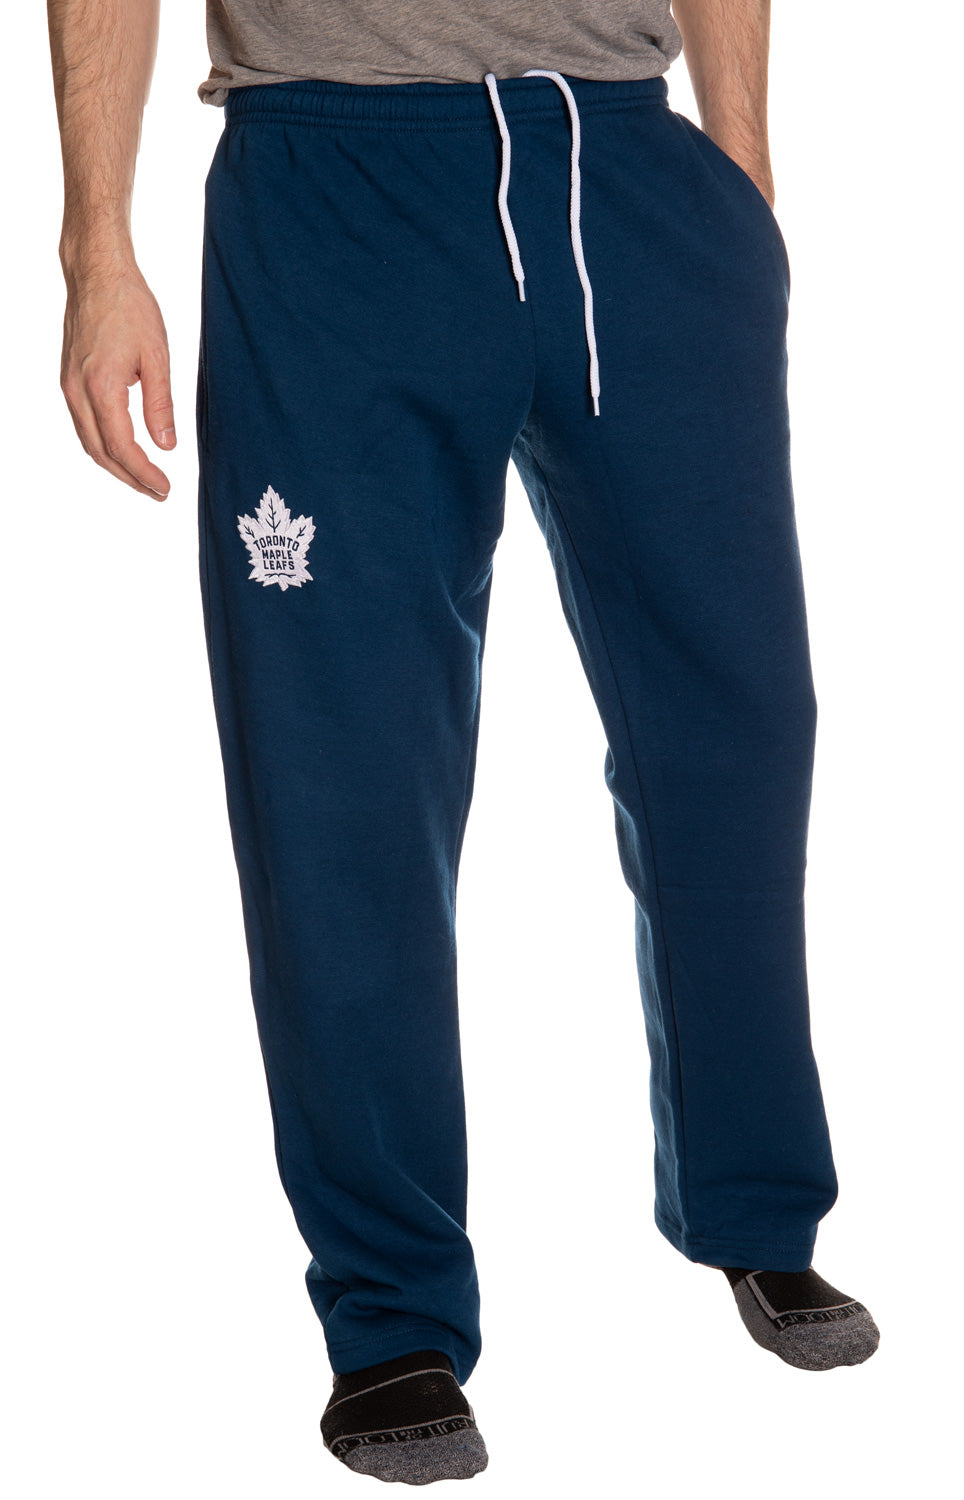 Toronto Maple Leafs Embroidered Logo Sweatpants Front View